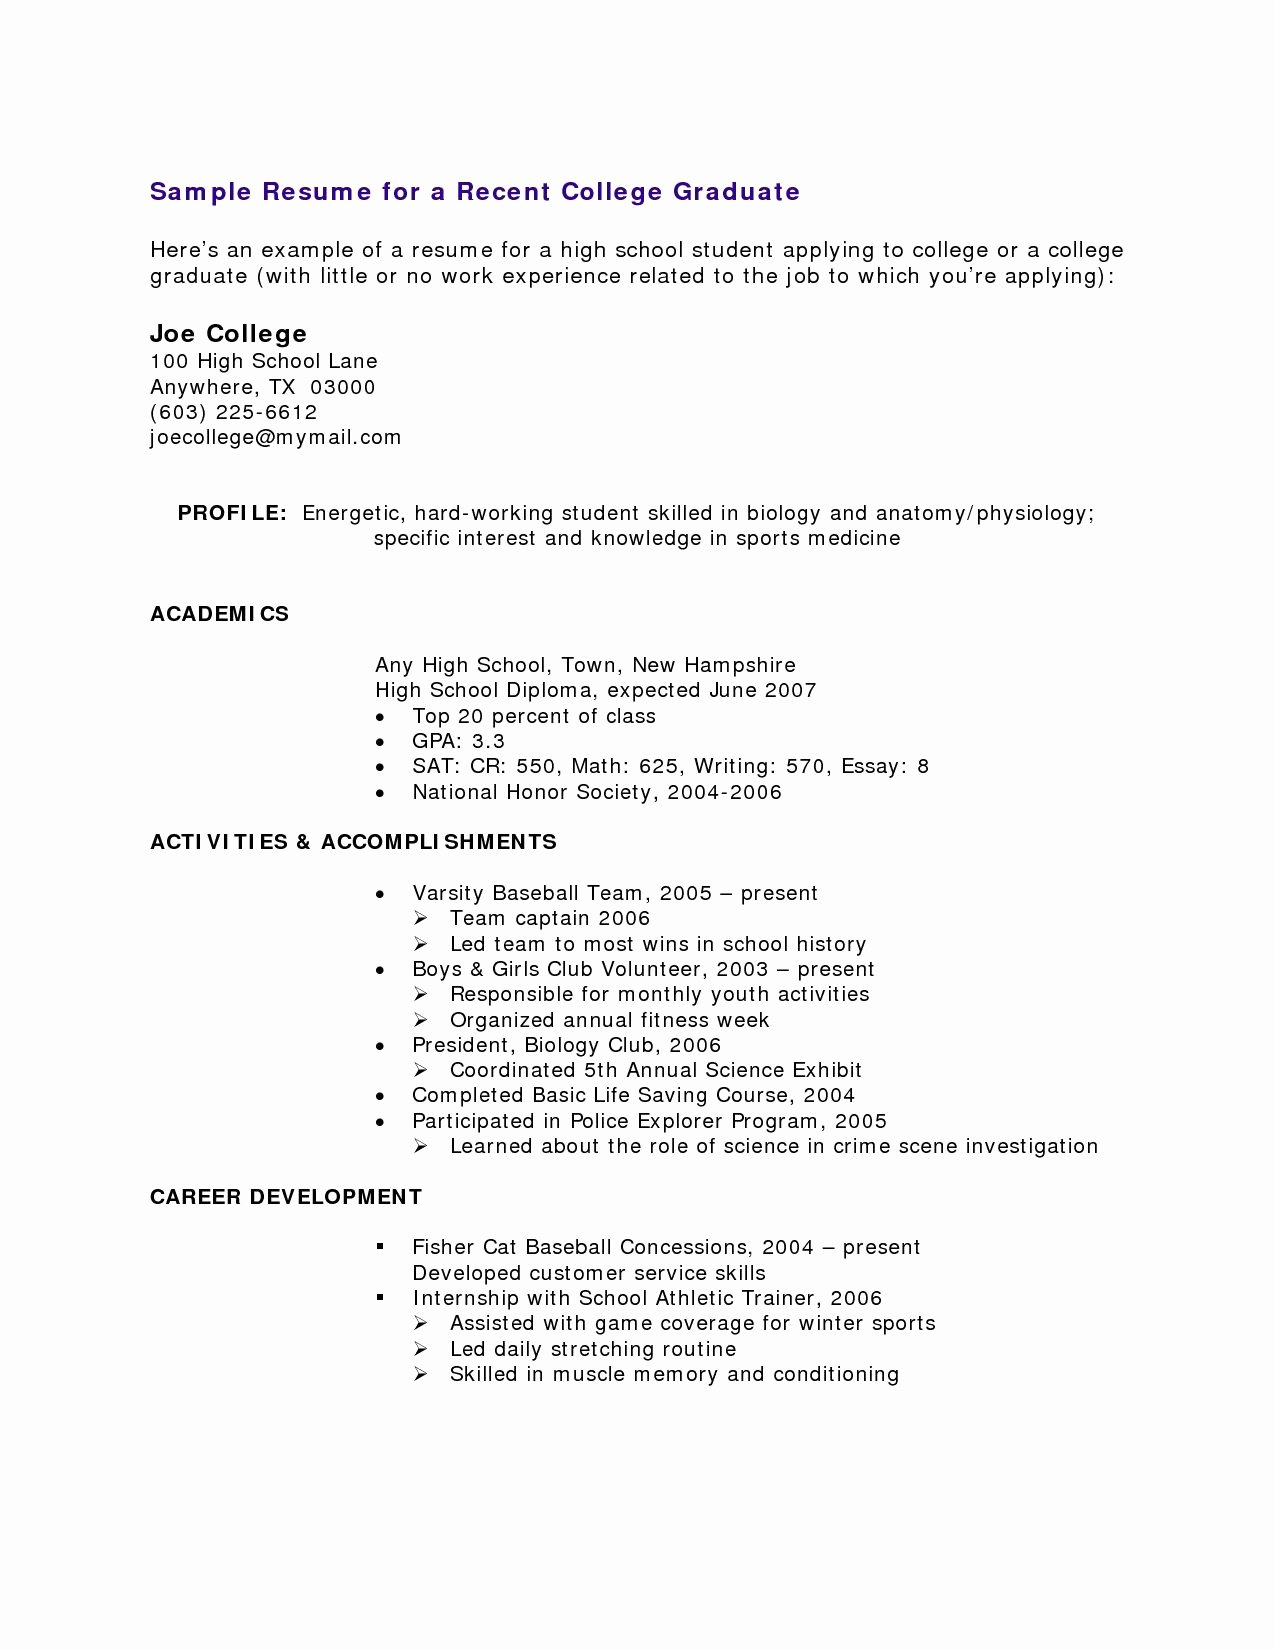 No Experience Resume Template New High School Student Resume with No Work Experience Resume